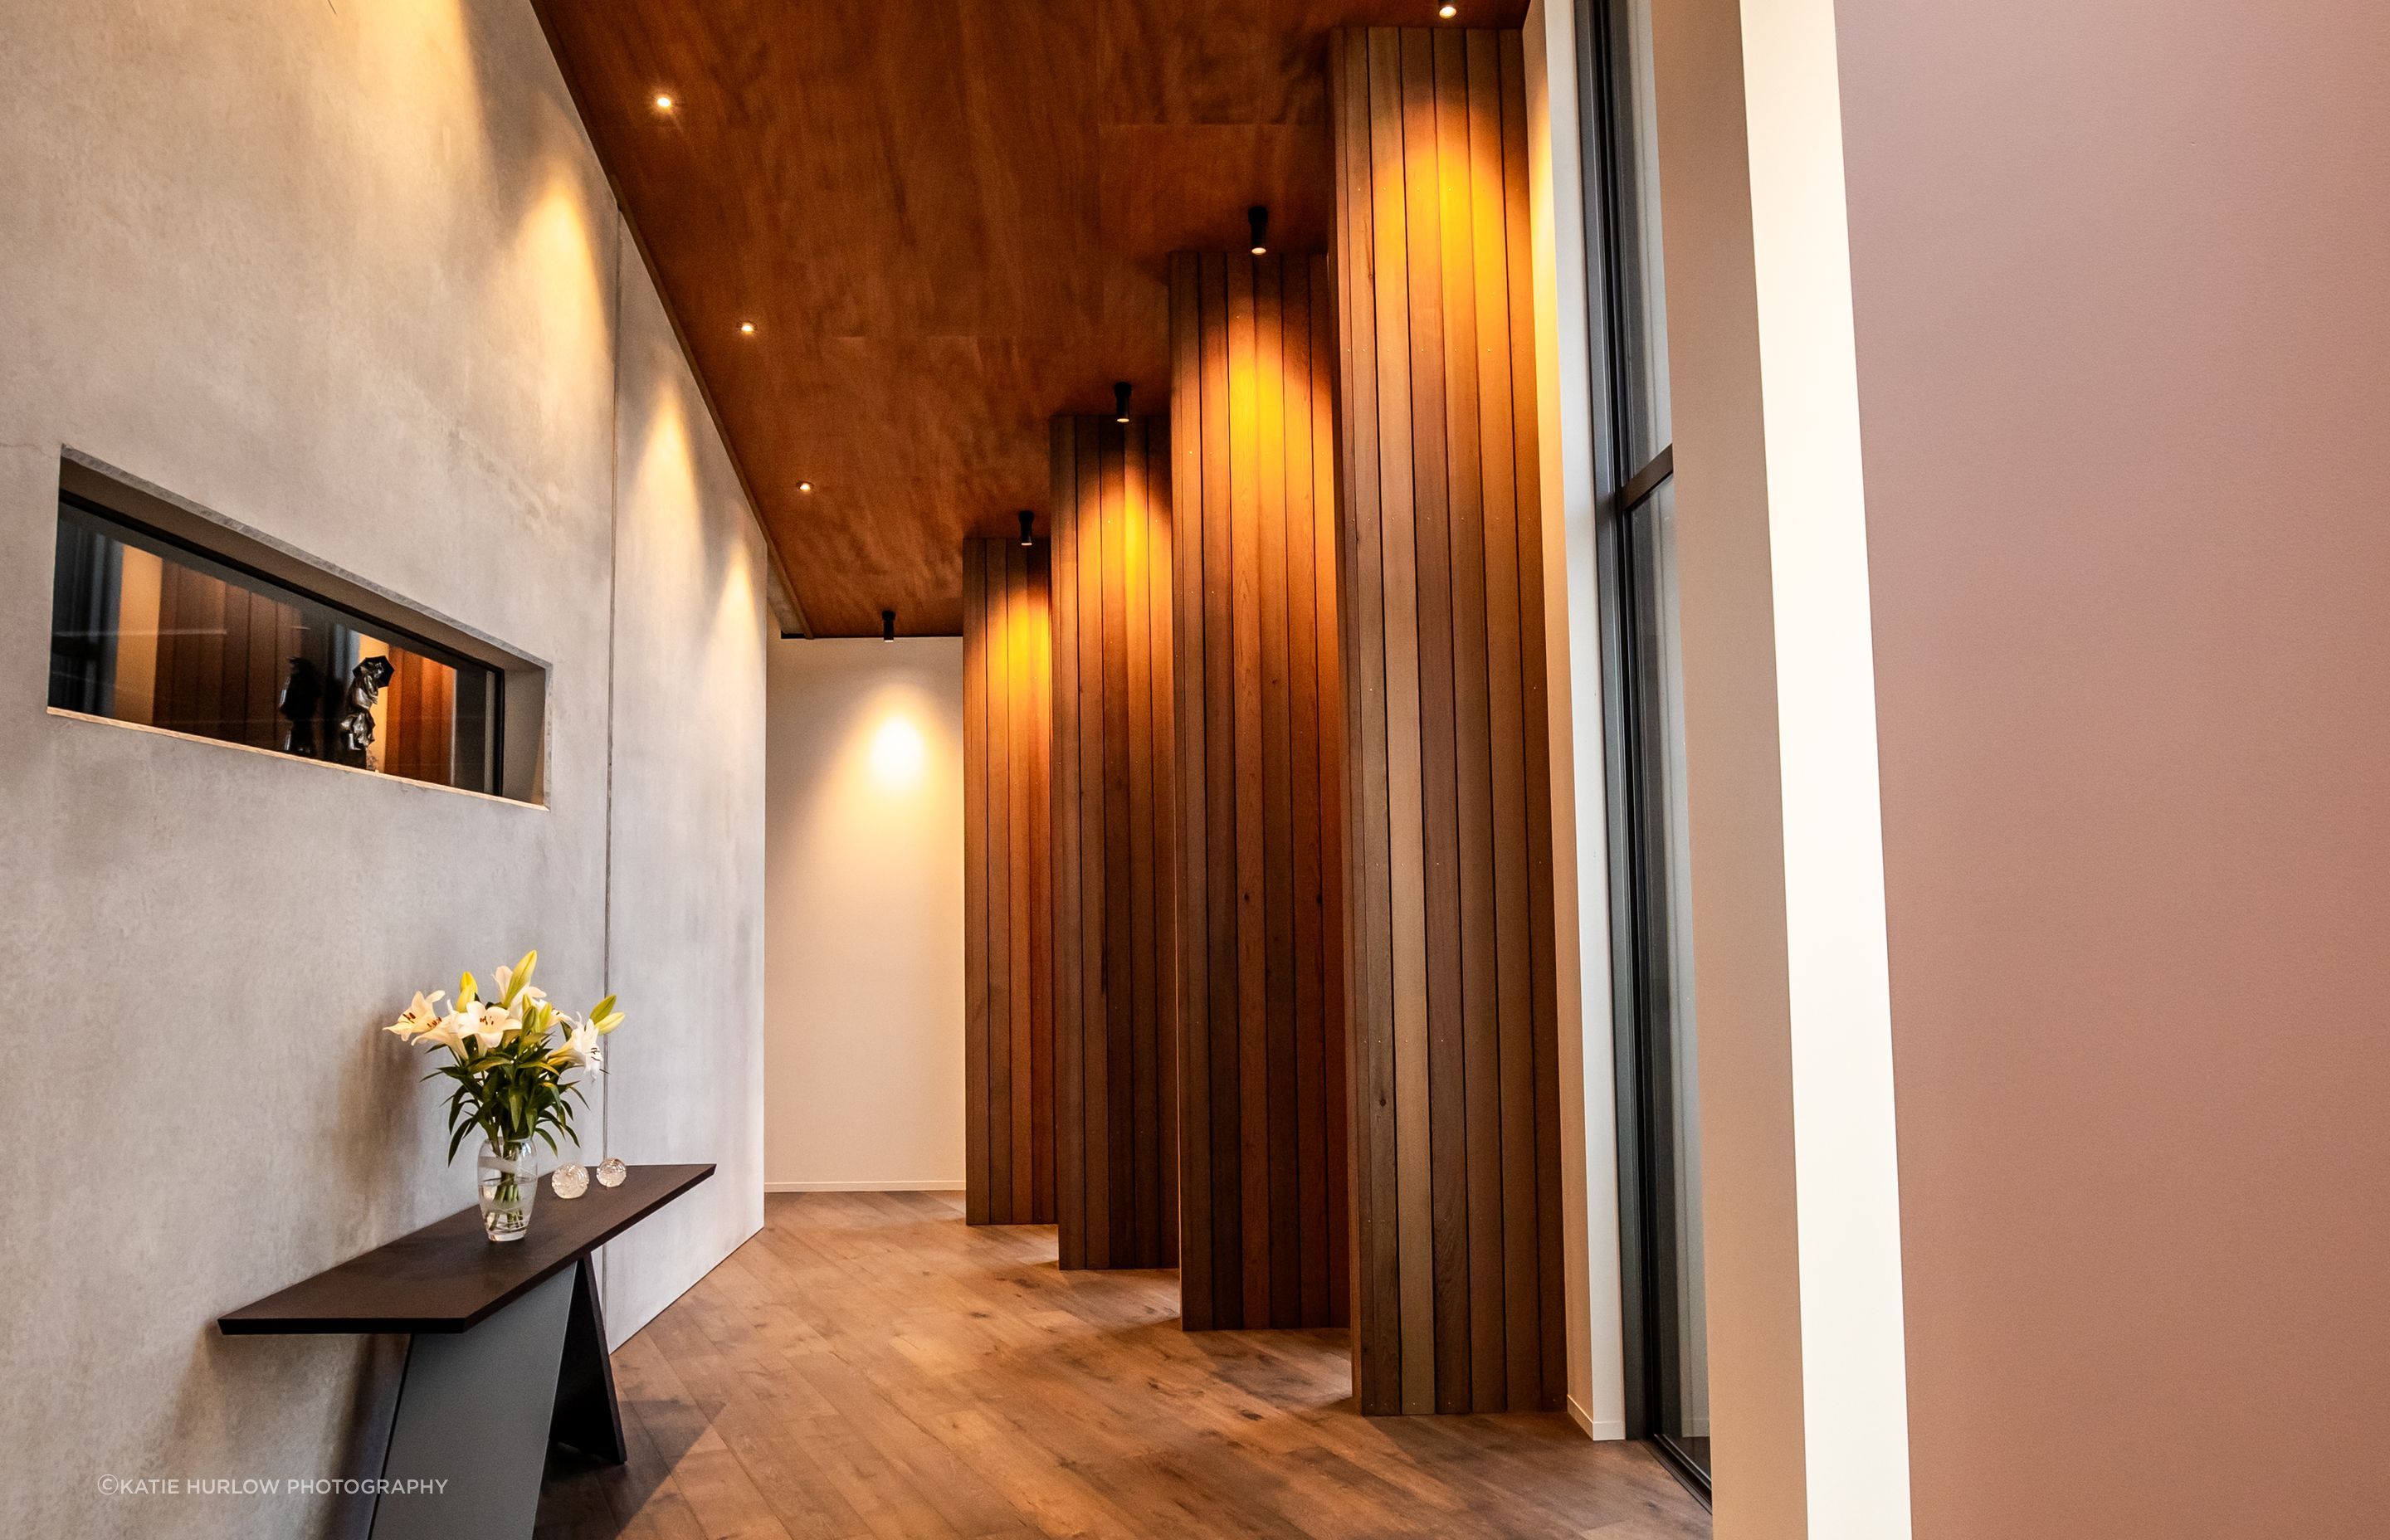 The timber fins in an internal corridor break up the journey to the bedrooms, creating enticing snapshots of the stunning view.